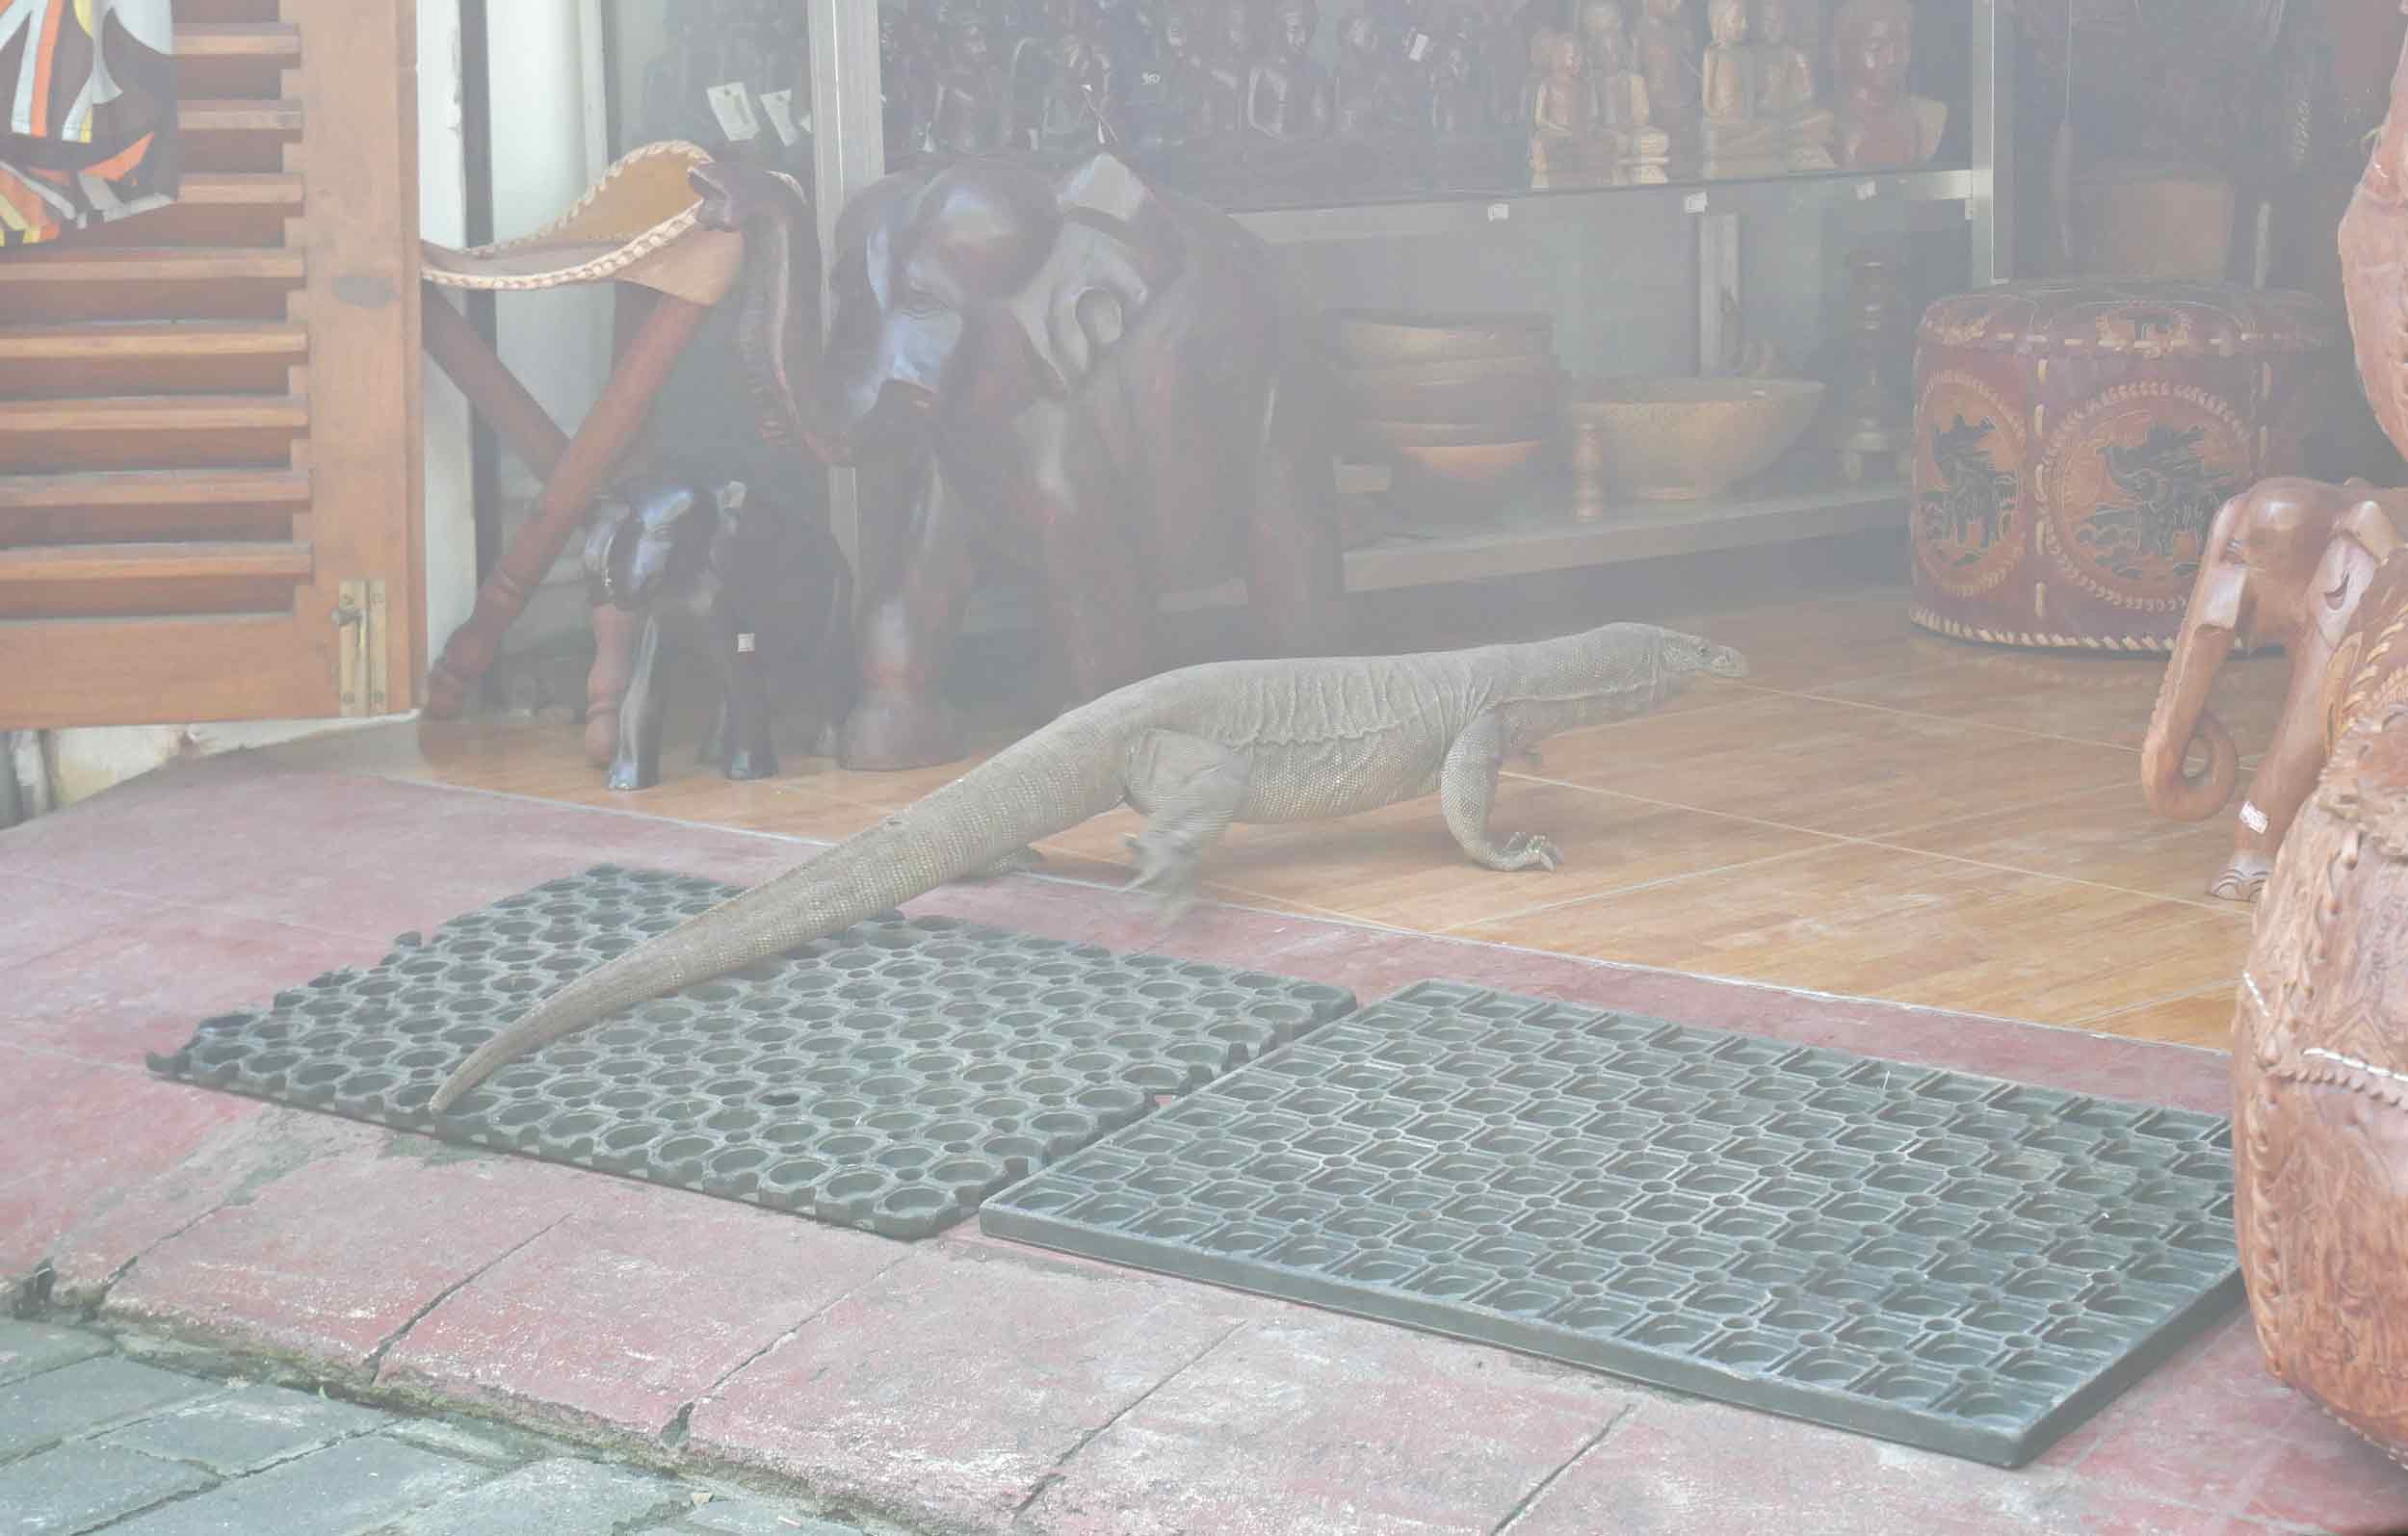  A monitor lizard decided to have a browse in a local shop. 